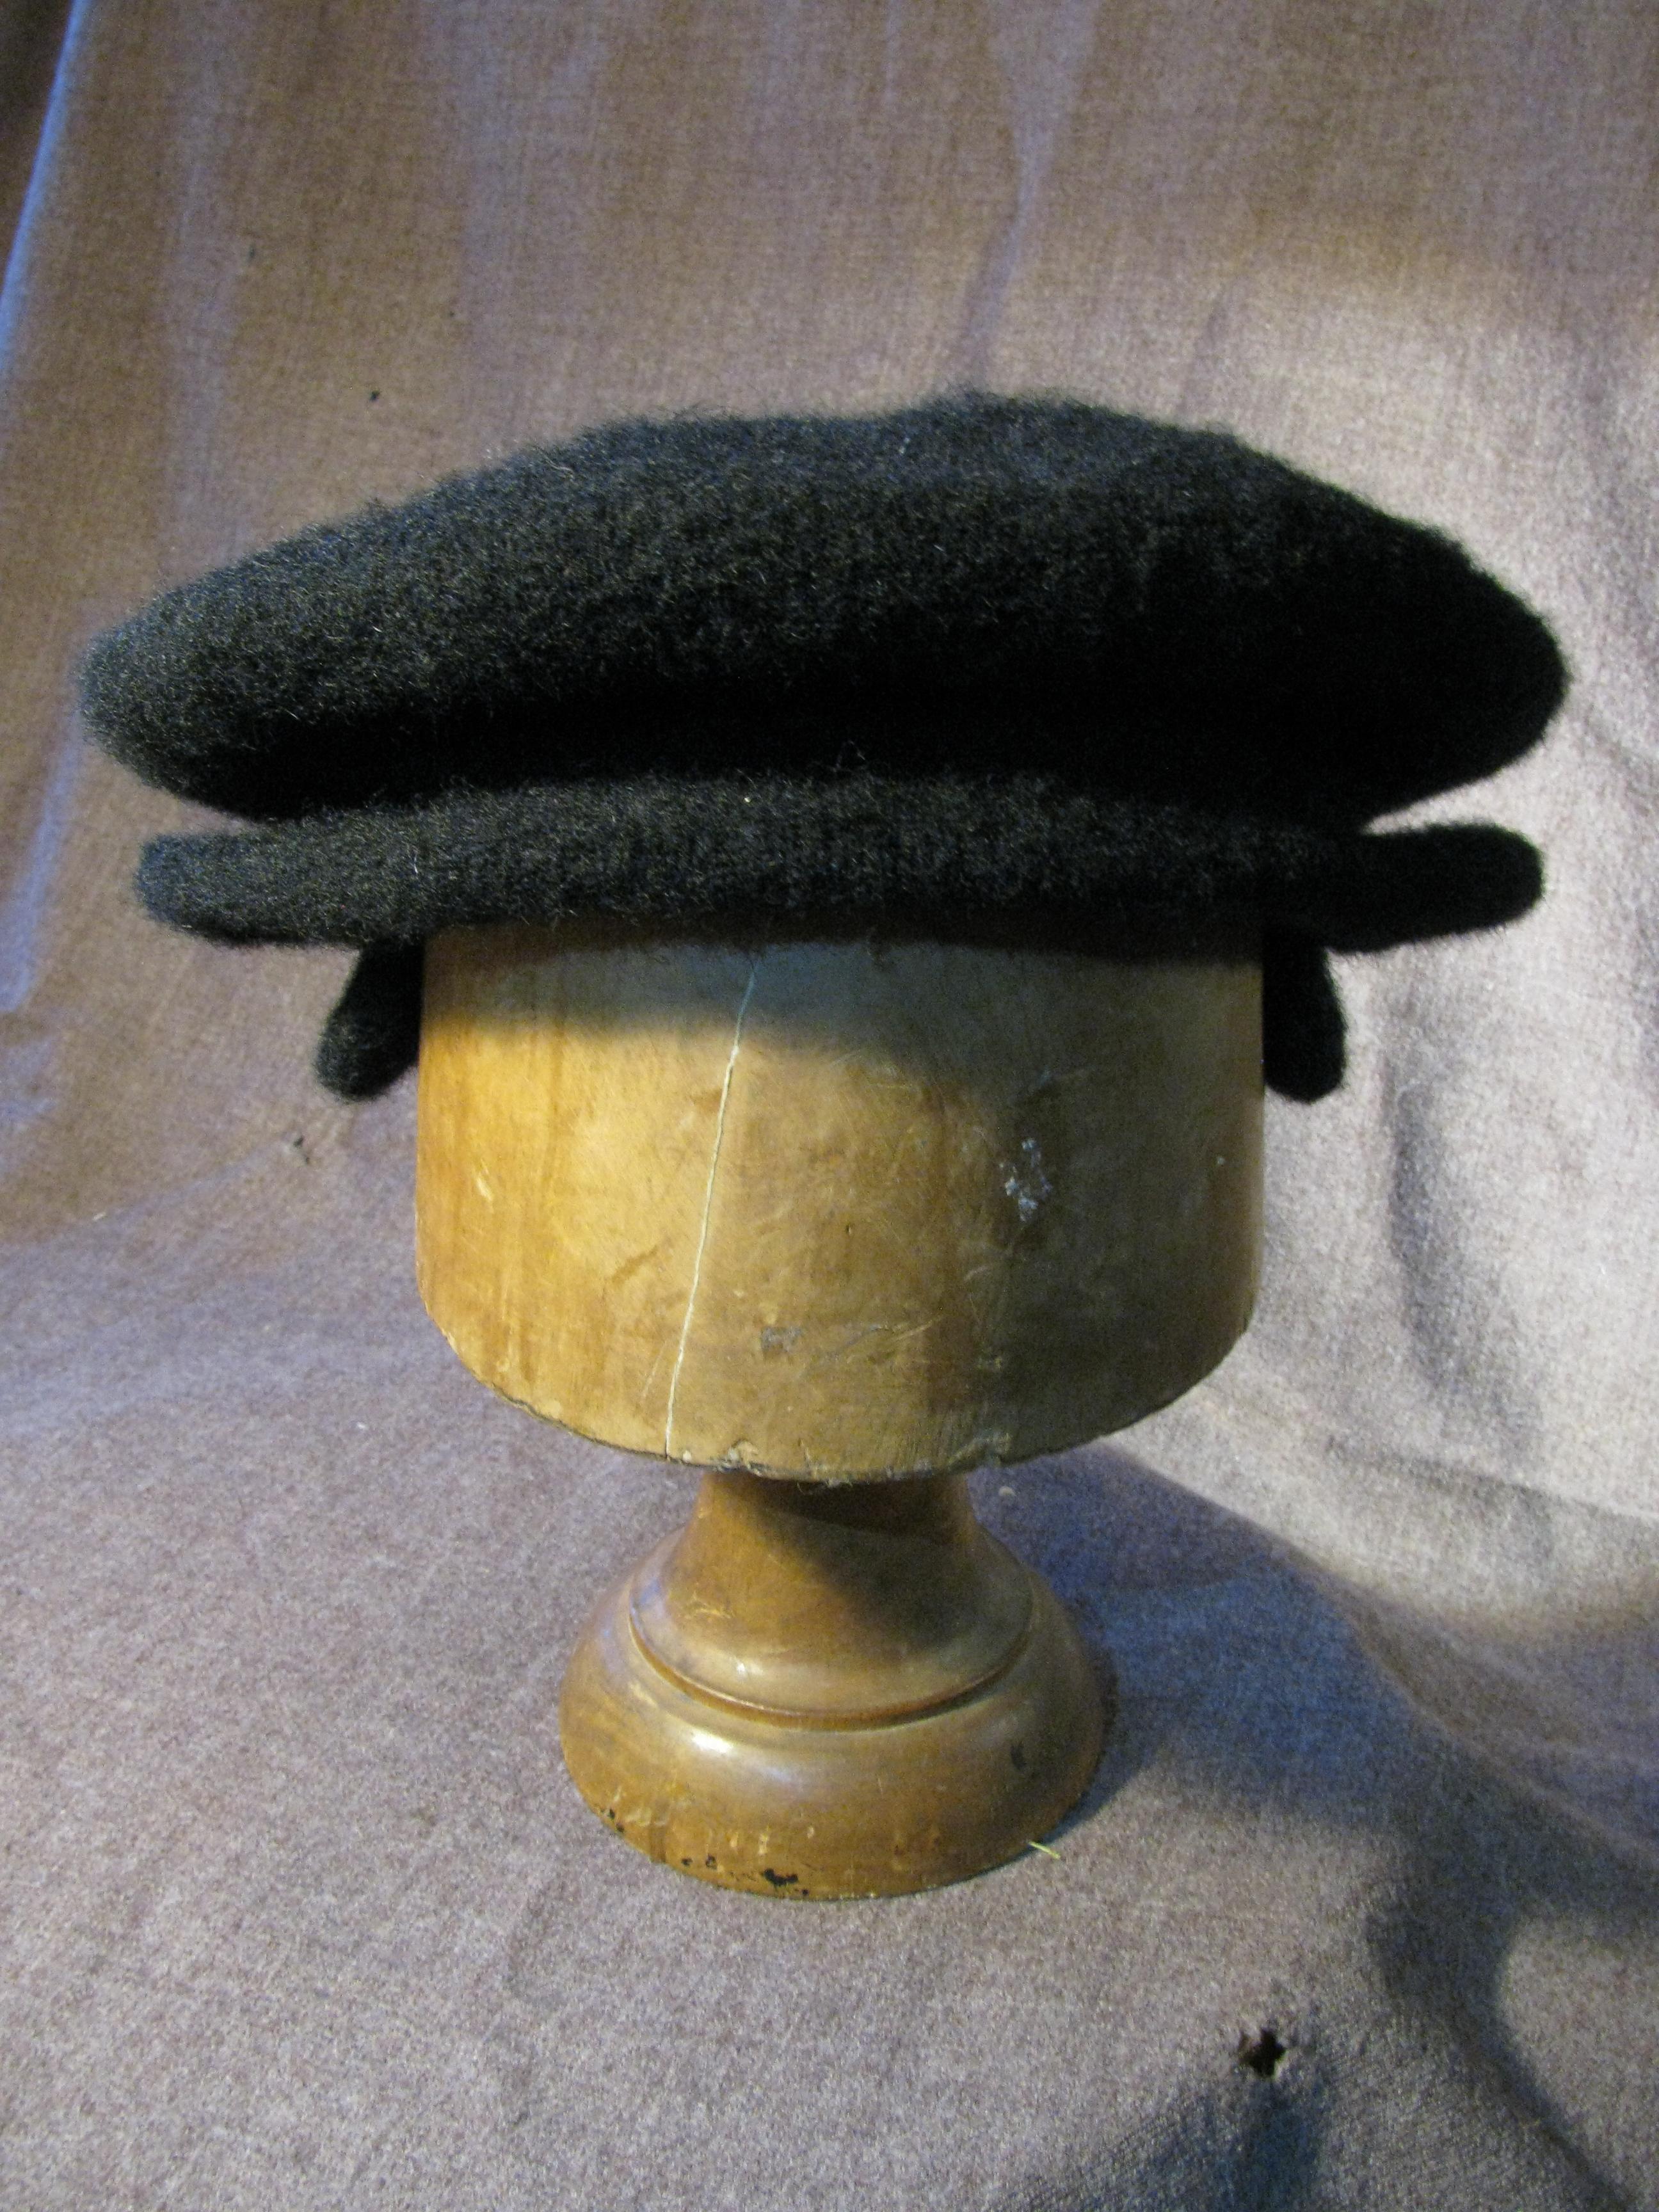 Prototype split-brimmed knitted cap by Rachel Frost for The Typical Tudor